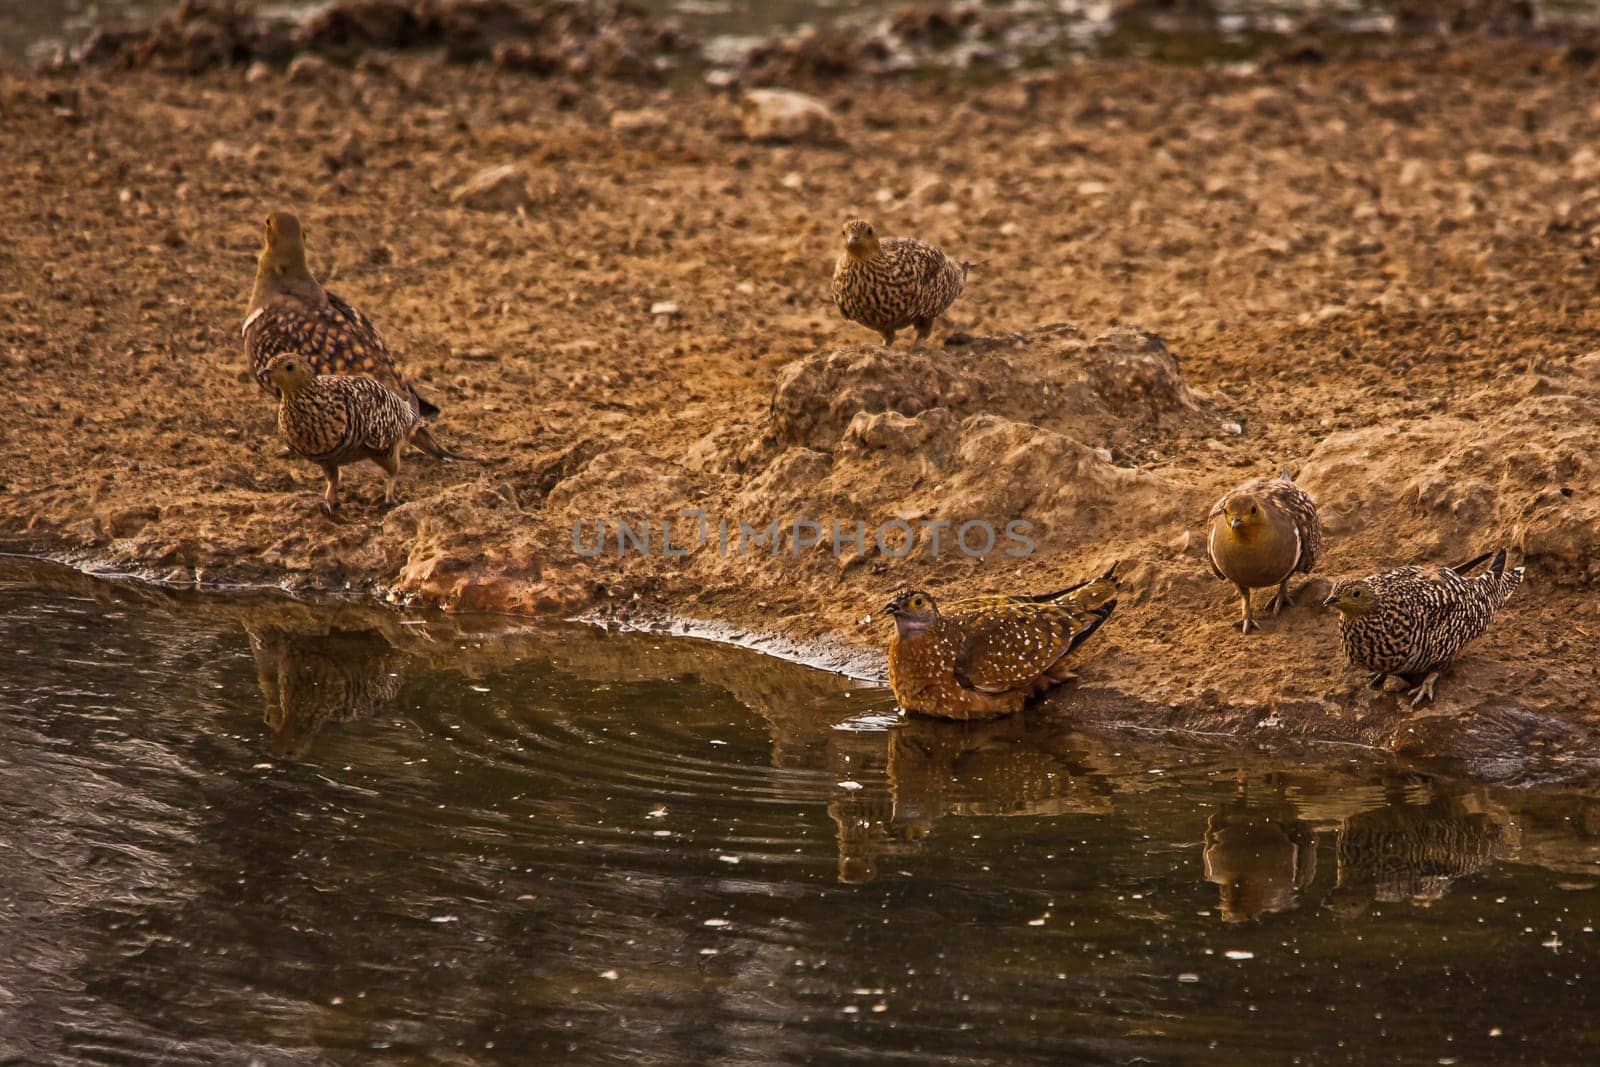 Namaqua Sandgrouse at the water 5303 by kobus_peche